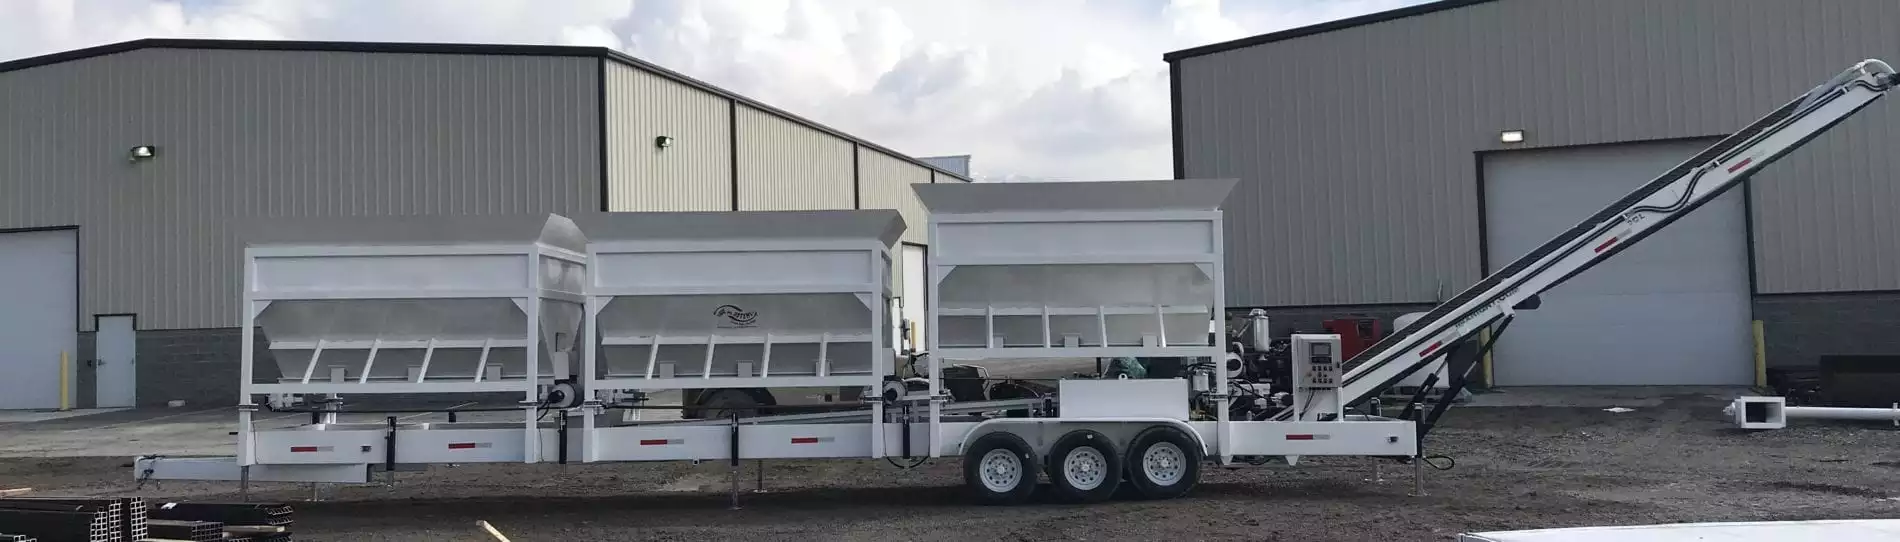 Portable Concrete Batching Plant 36+ Cubic Yards Automated Mix Right 2CL-36-3 at Right Manufacturing Systems Inc. Lindon, Utah